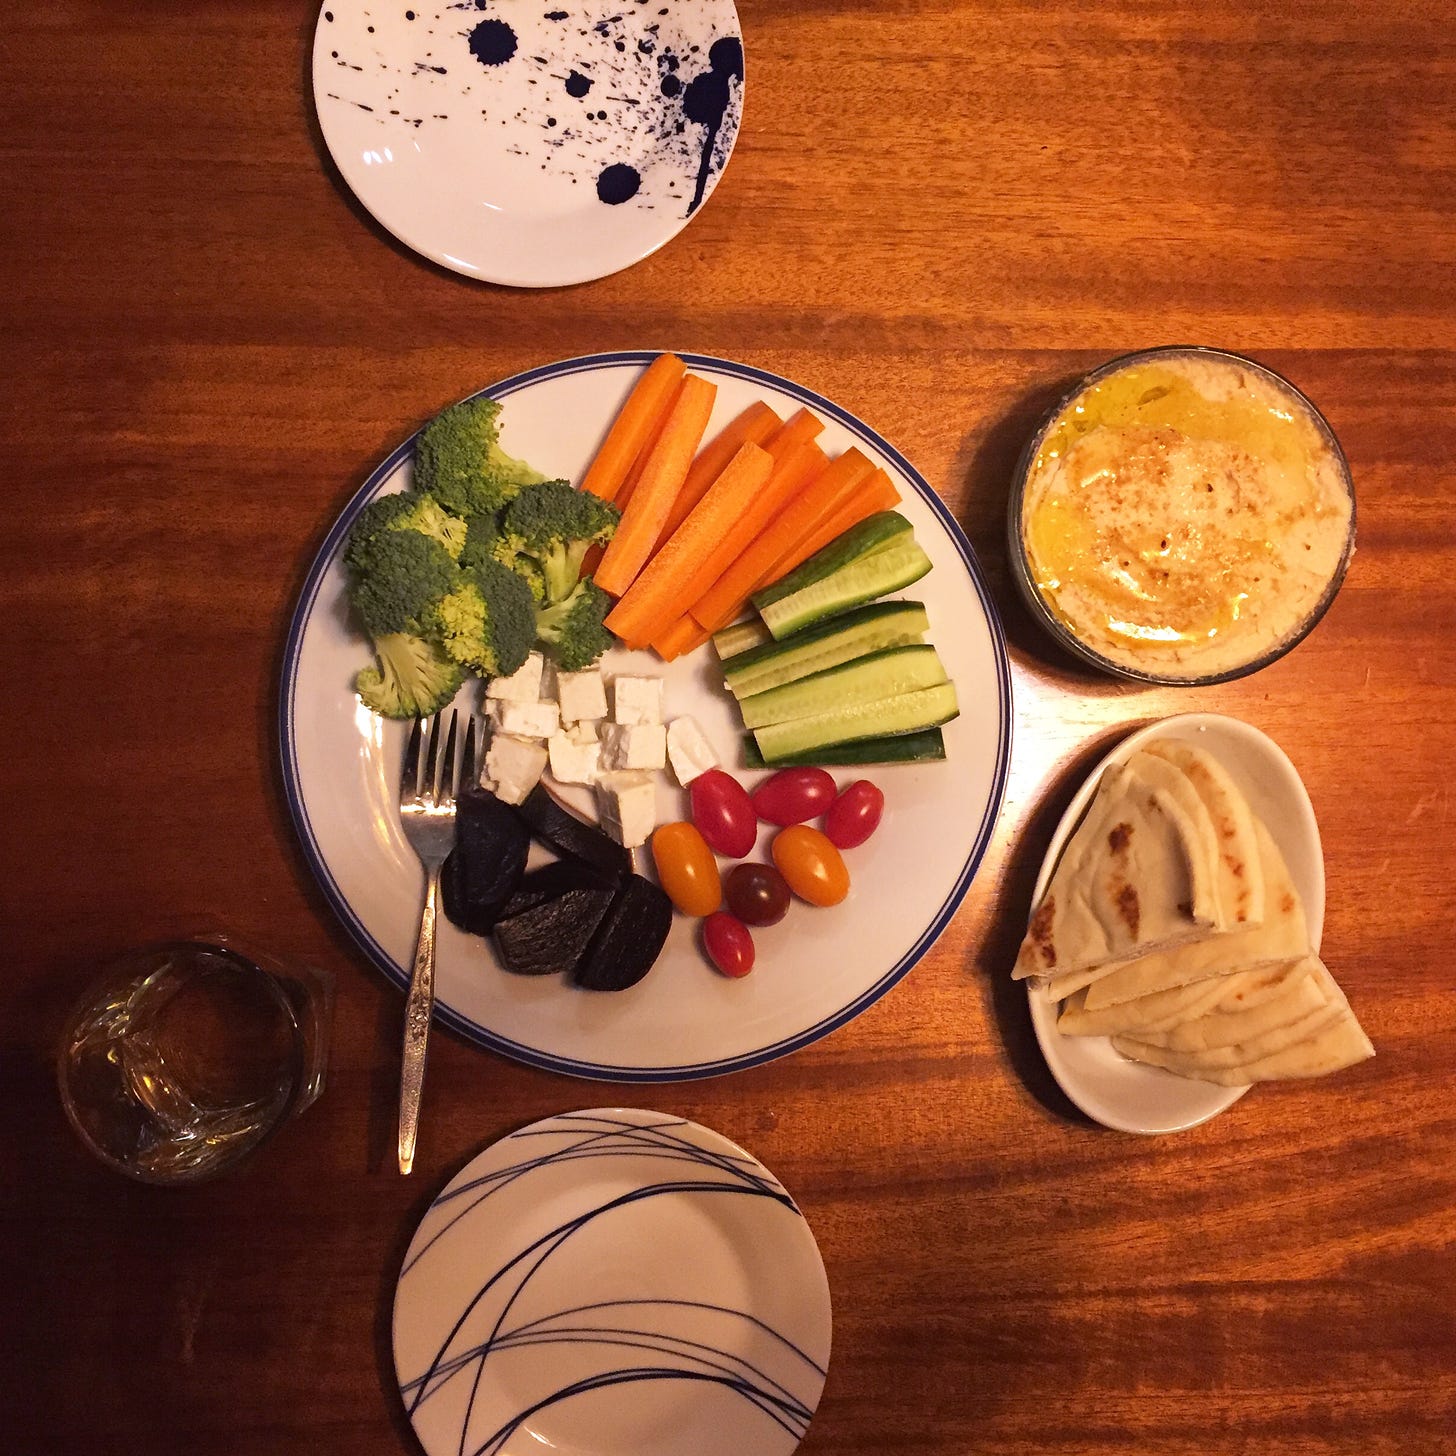 A large plate of broccoli, carrot and cucumber sticks, and grape tomatoes with cubes of feta and pickled beets. To its right is a small dish of flatbread wedges, and a glass container of white bean hummus dusted with paprika and coated in olive oil. Two small plates sit on either side of the food.